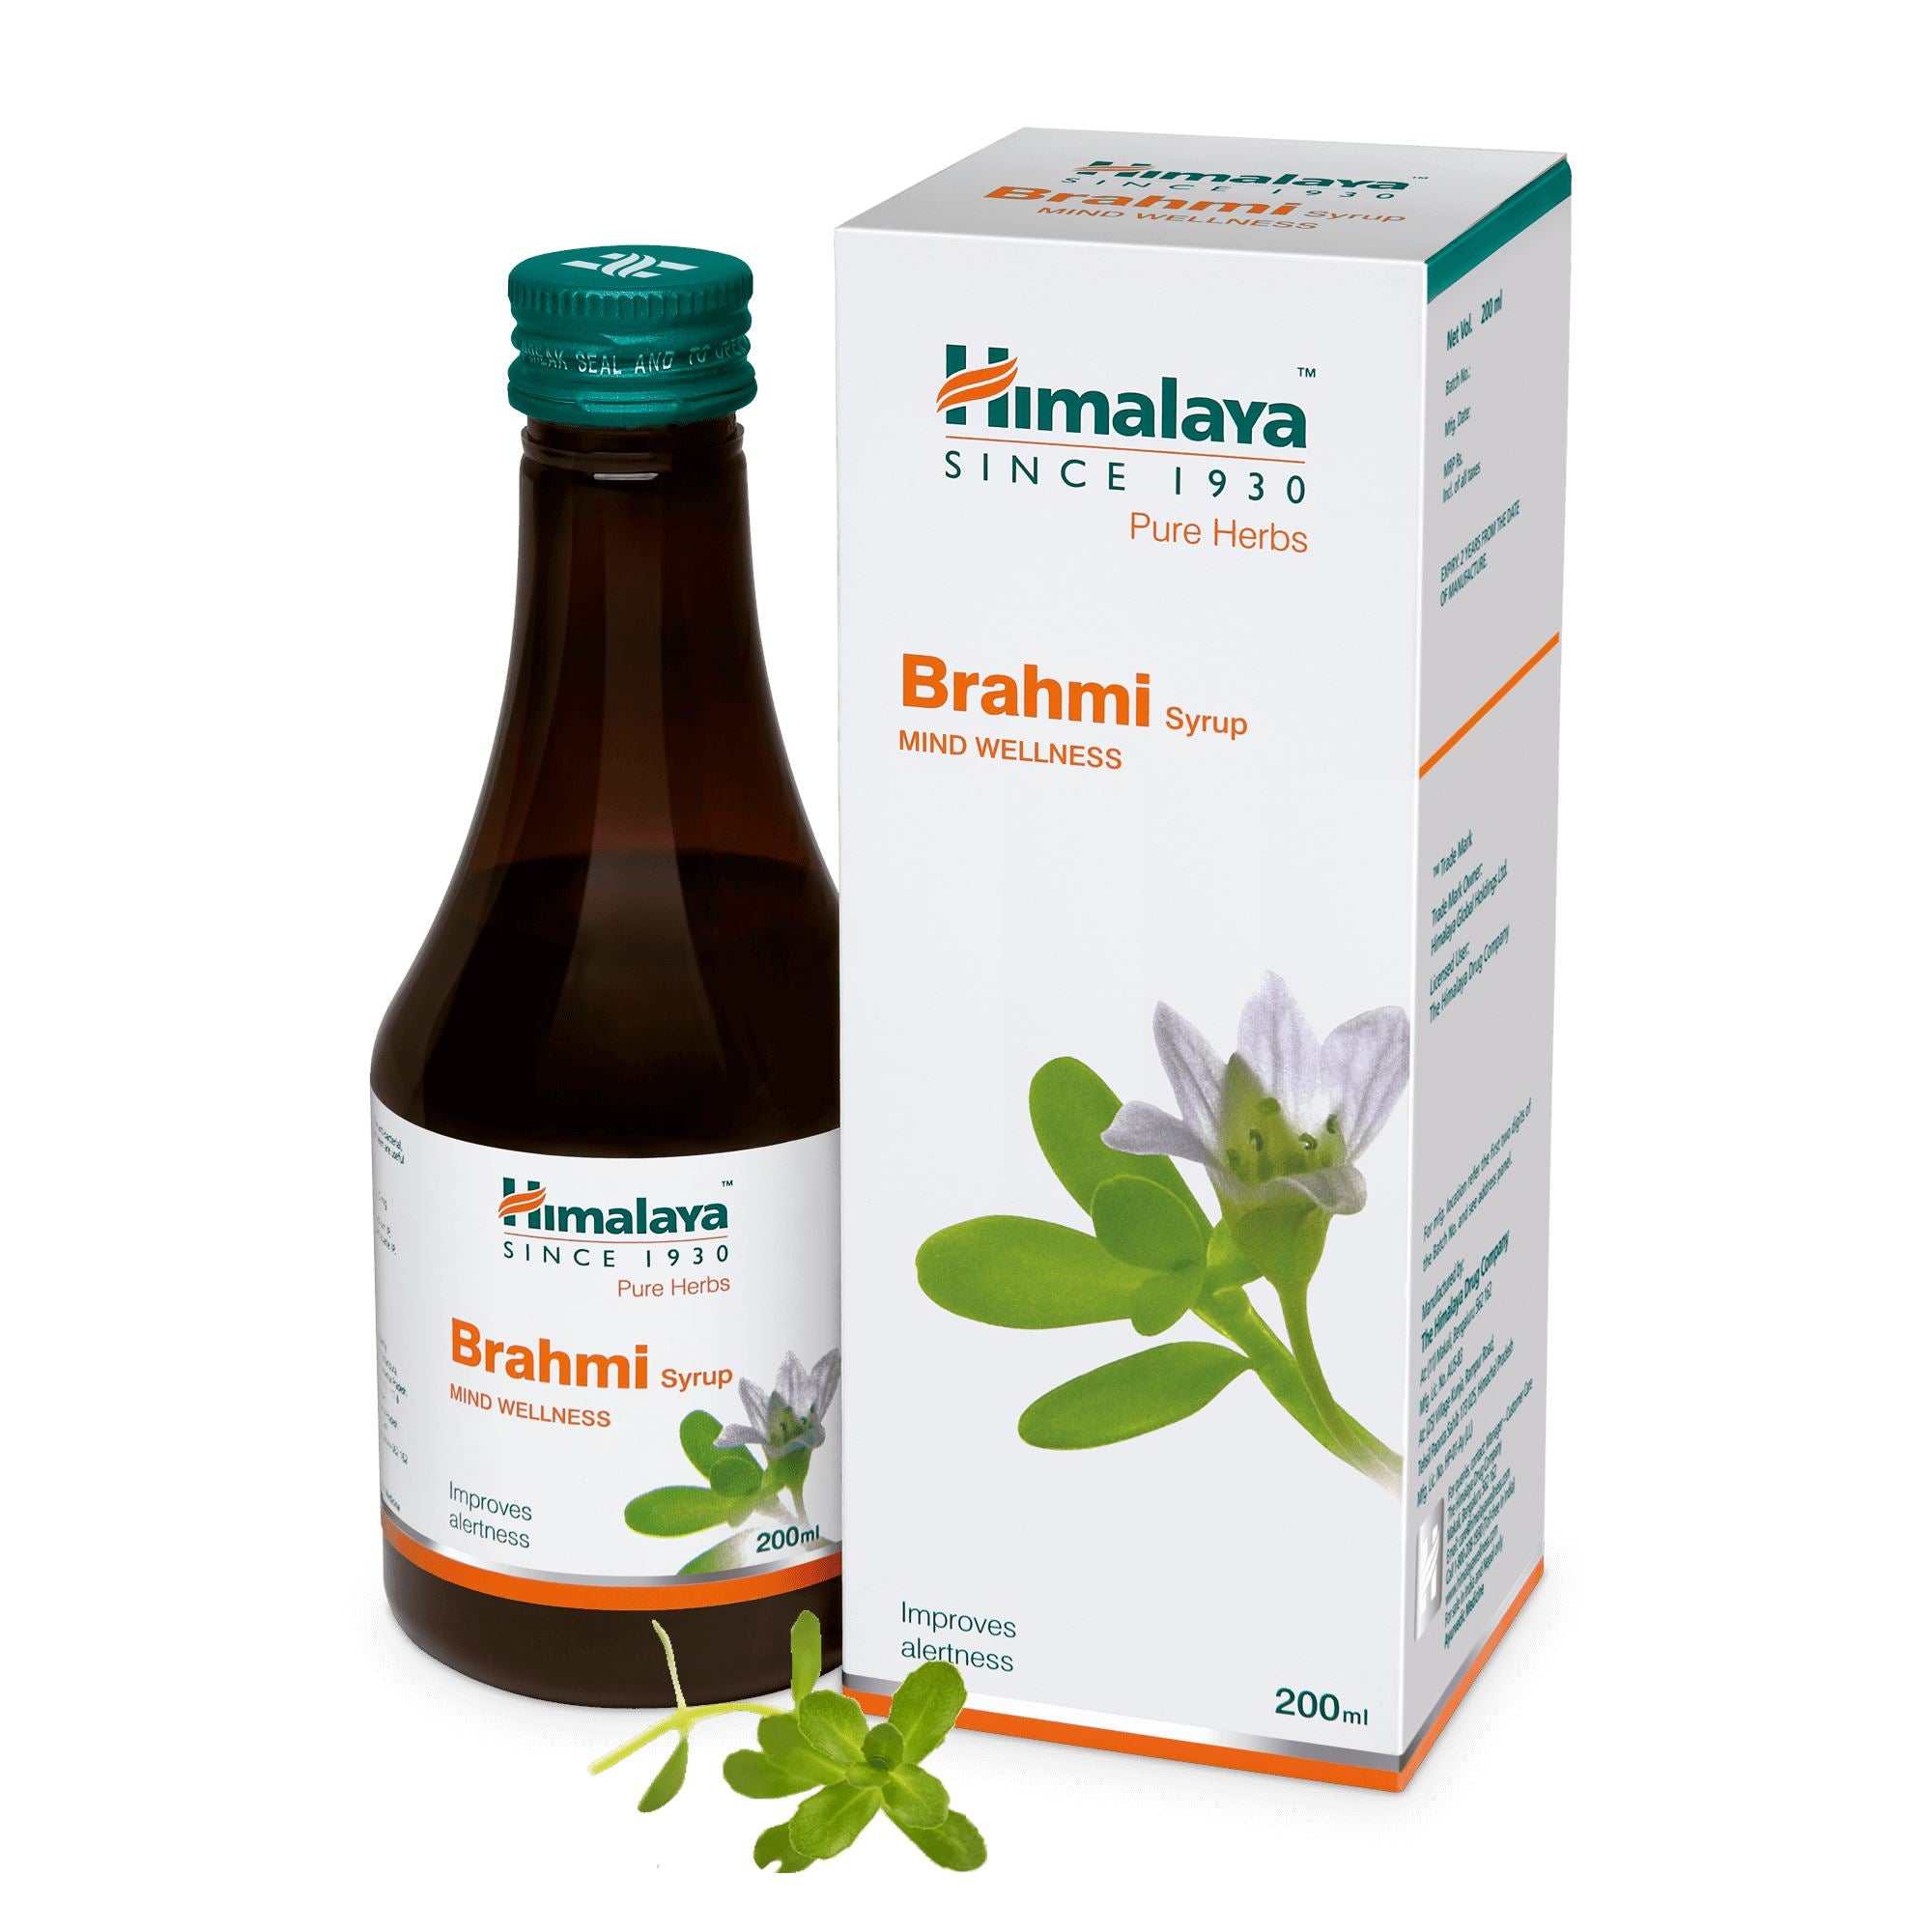 Himalaya Brahmi Syrup 200ml- Helps calm the mind, promote clarity of thought, and memory consolidation